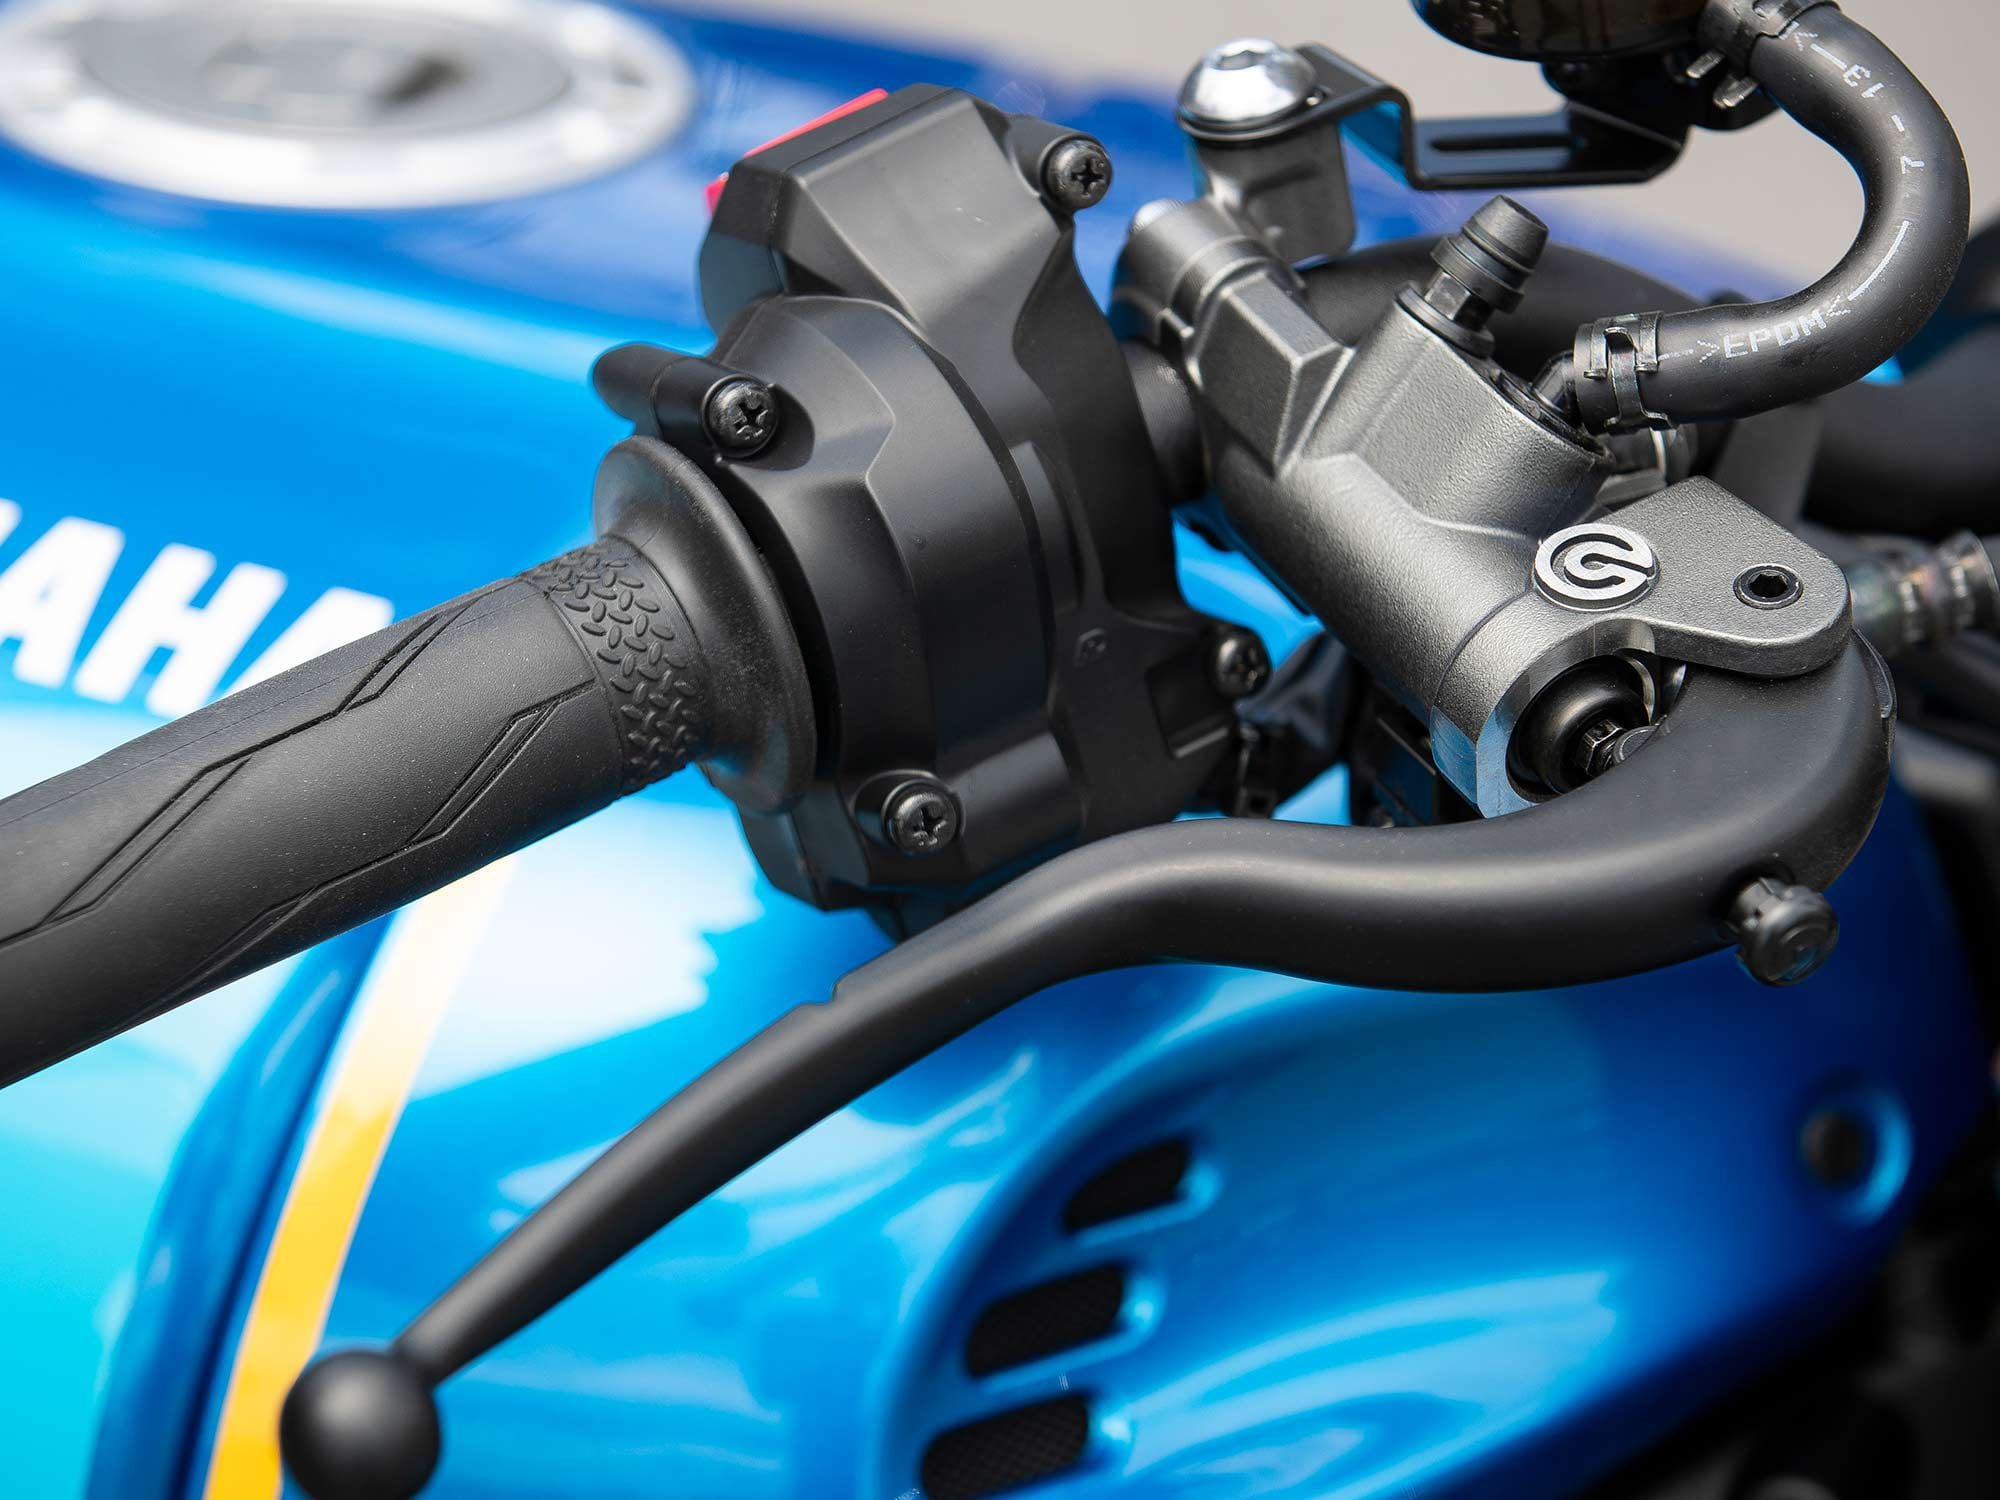 A Brembo radial master cylinder has plenty of power and initial bite without being too touchy.